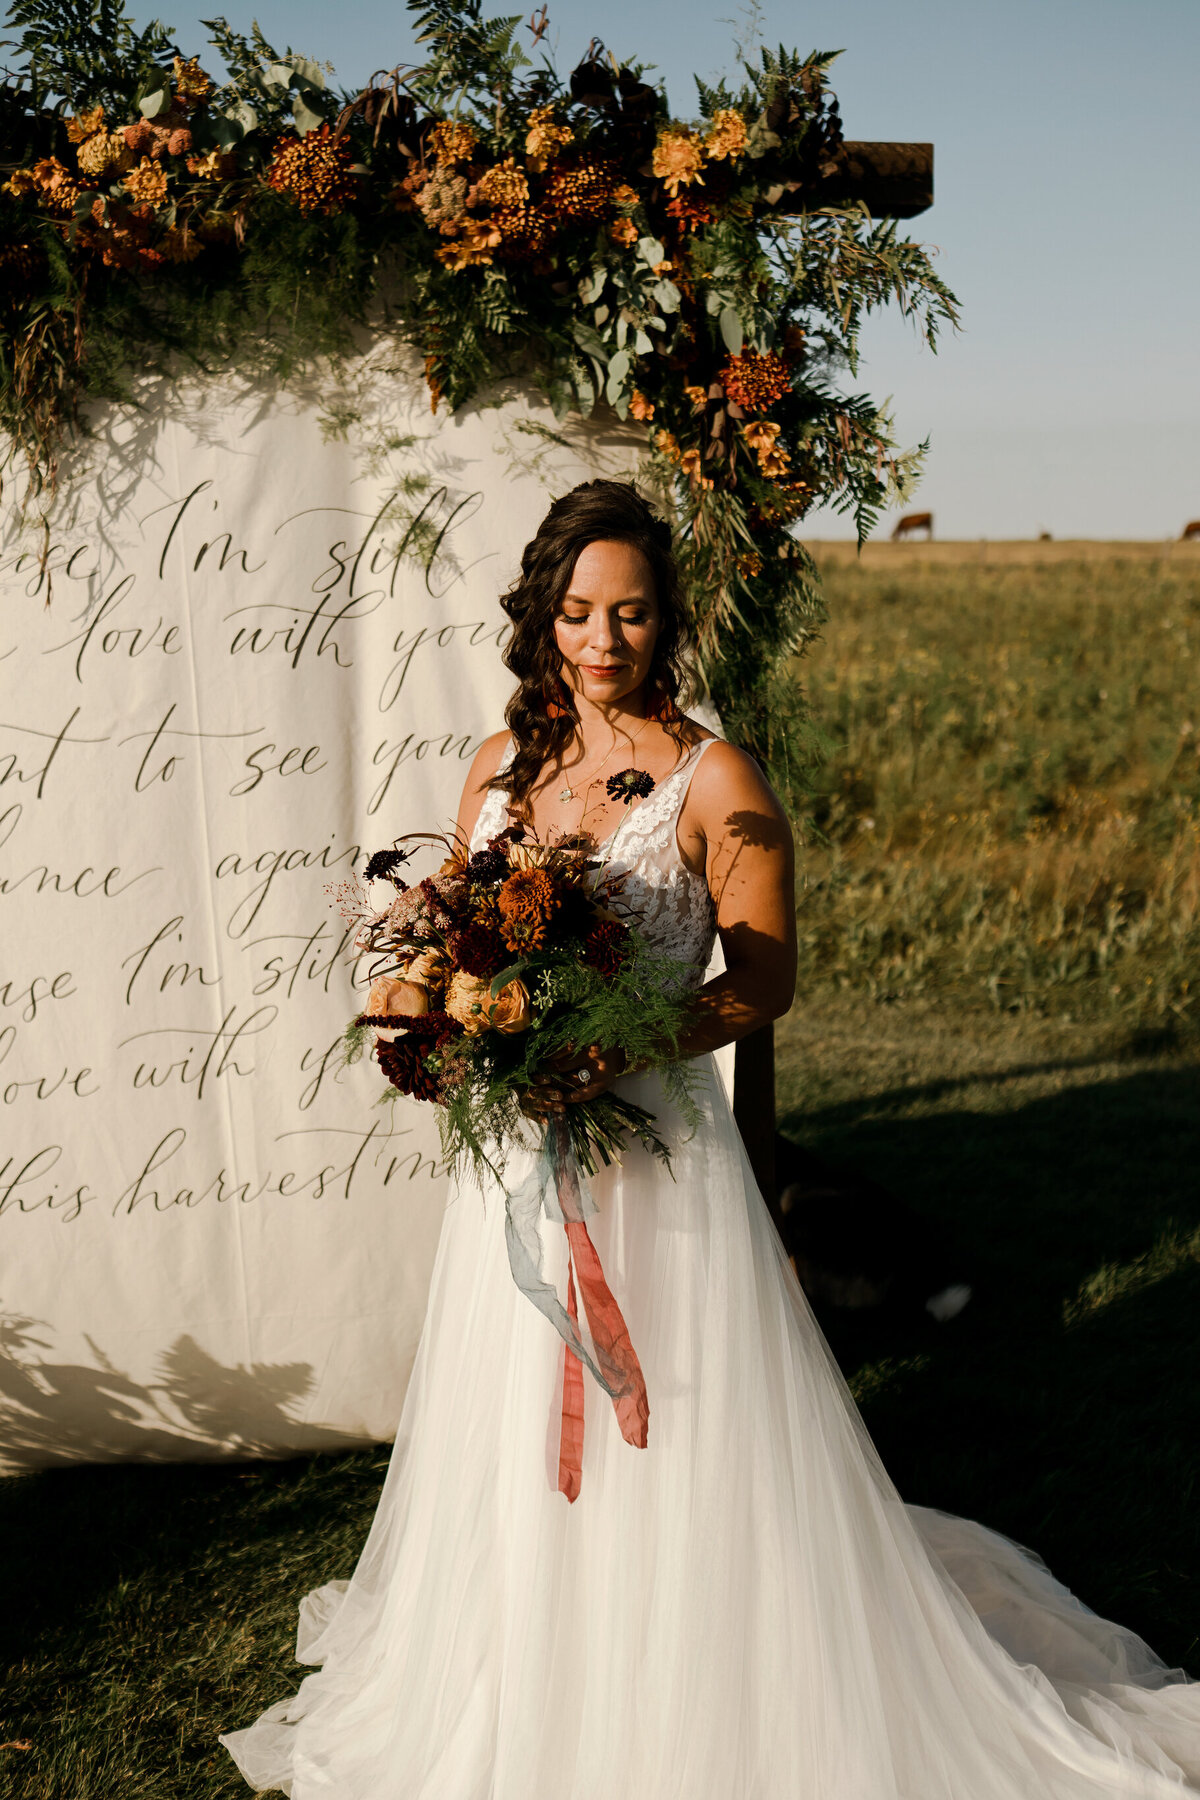 floral-and-field-design-bespoke-wedding-floral-styling-calgary-alberta-harvest-moon-6